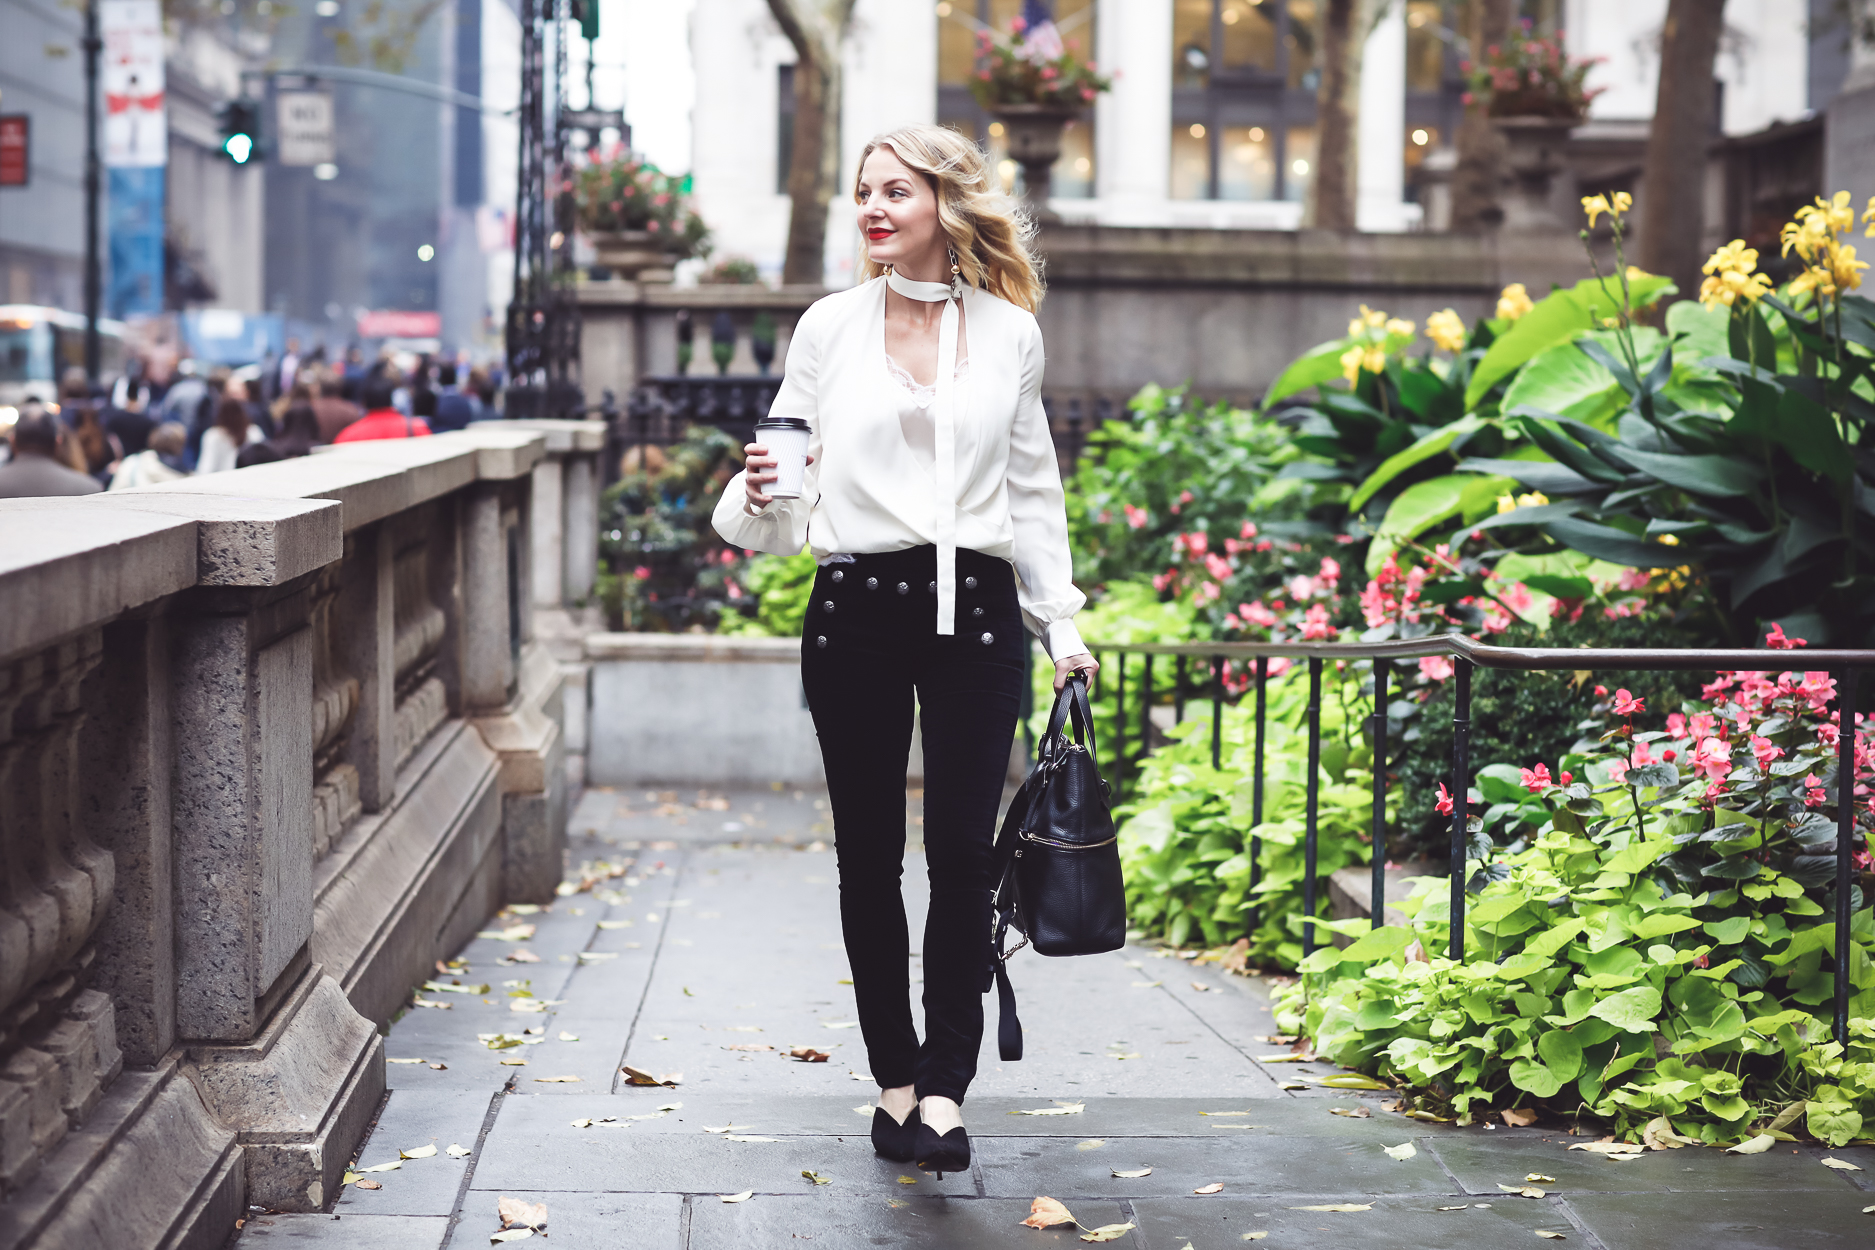 Blonde woman wearing white choker blouse by Alexis, Black velvet veronica beard skinny pants with sailor buttons and black mules by who what wear carrying a Henri Bendel bag in Bryant Park in NYC